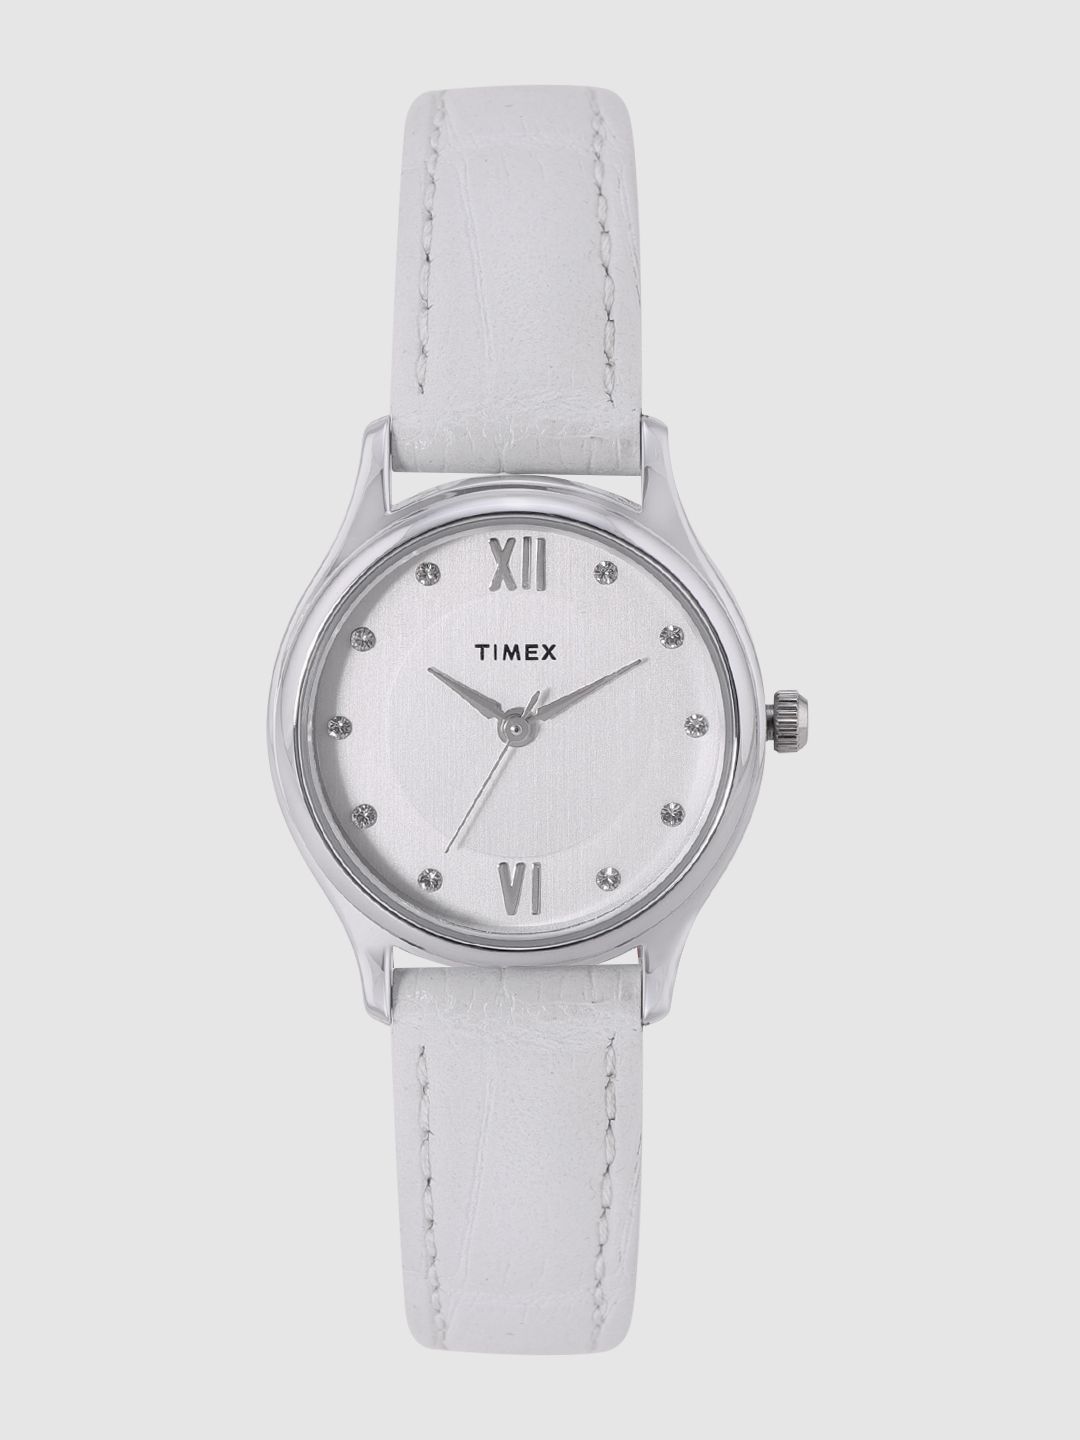 Timex Women Silver-Toned Analogue Watch TW00ZR267E Price in India